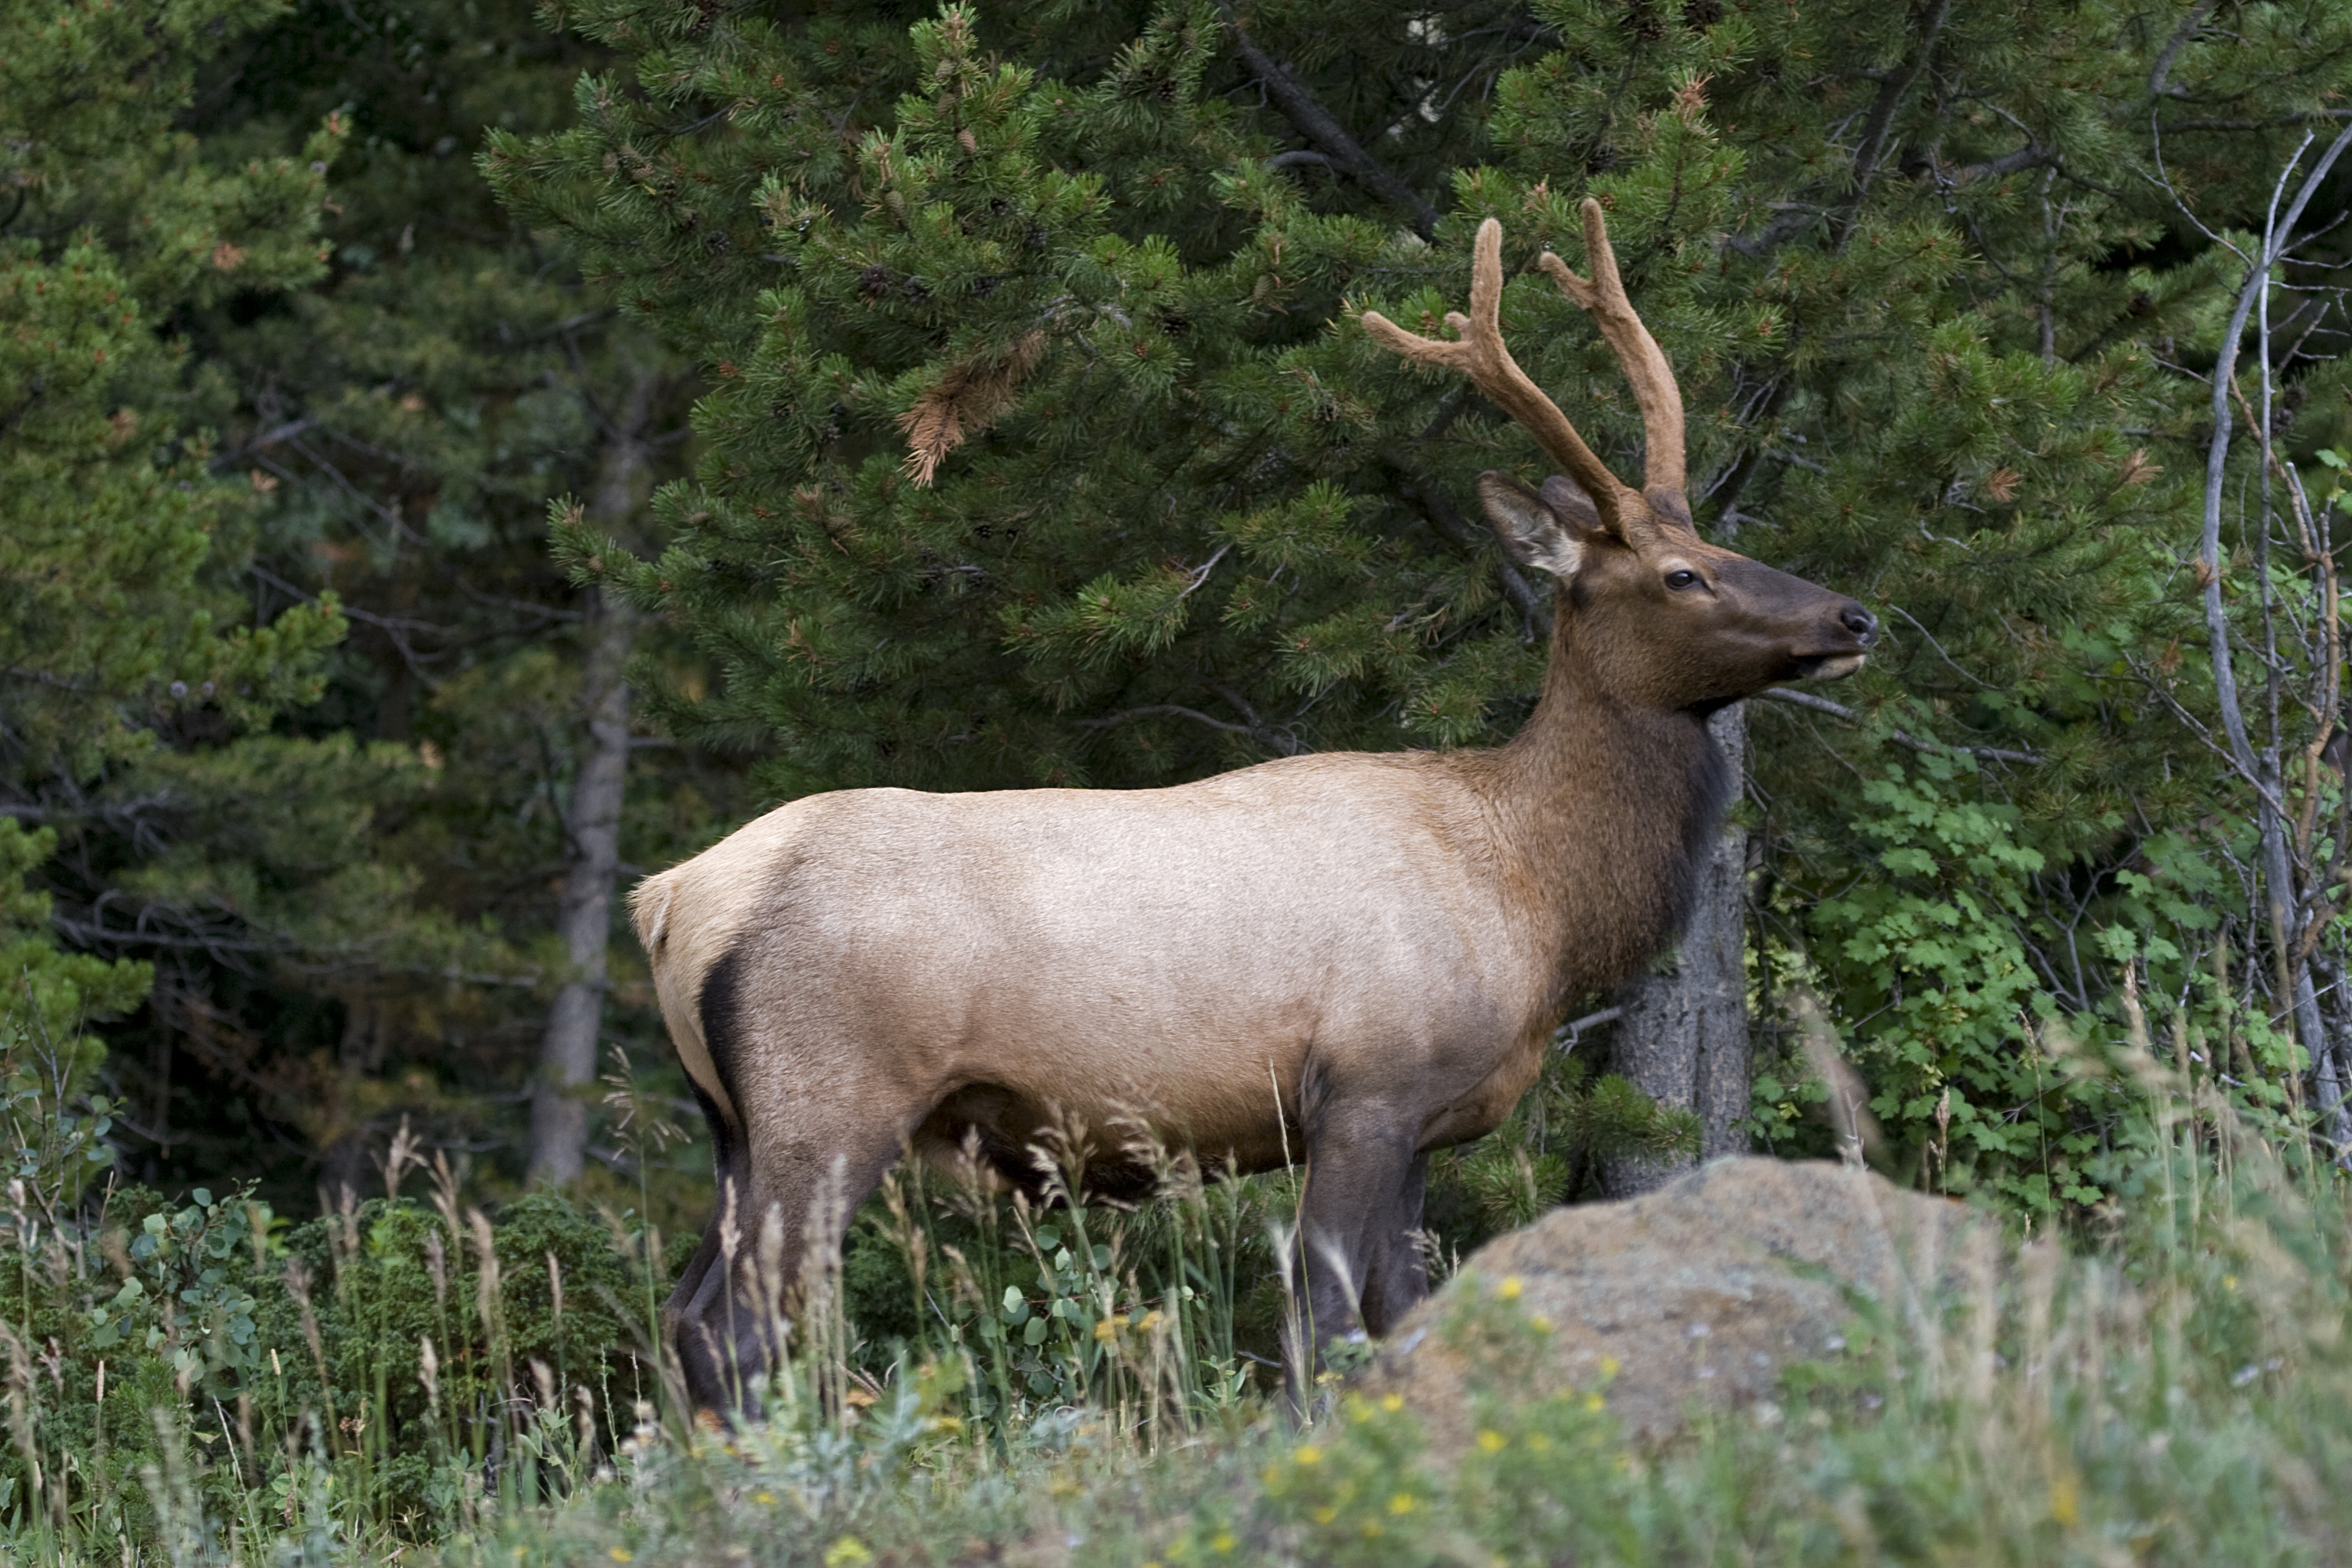 Male Elk defending his herd in Rocky Mountain National Park . (Photo by: Universal Education/Universal Images Group via Getty Images) (UniversalImagesGroup&mdash;UIG via Getty Images)